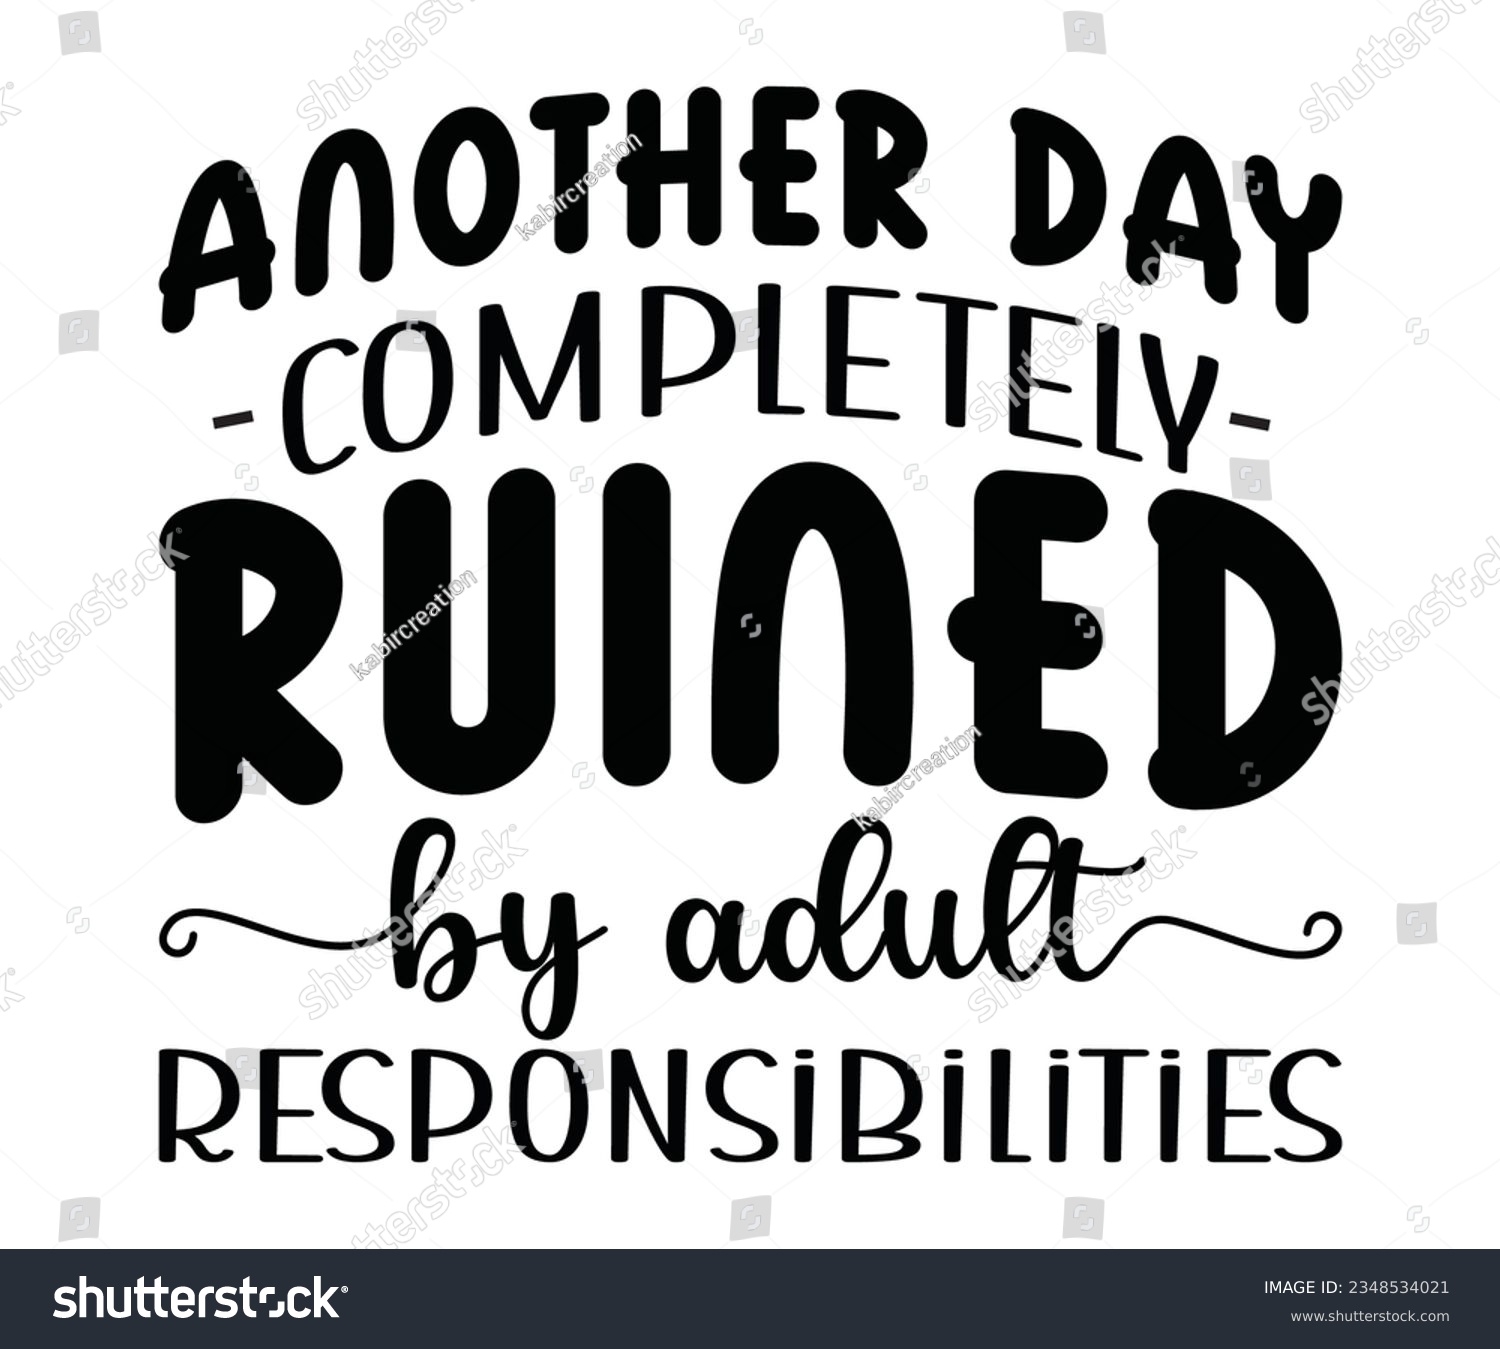 SVG of ANOTHER DAY RUINED COMPLETELY  by adult RESPONSIBILITIES svg, ANOTHER DAY ,COMPLETELY, RESPONSIBILITIES T shirt, by adult svg  svg